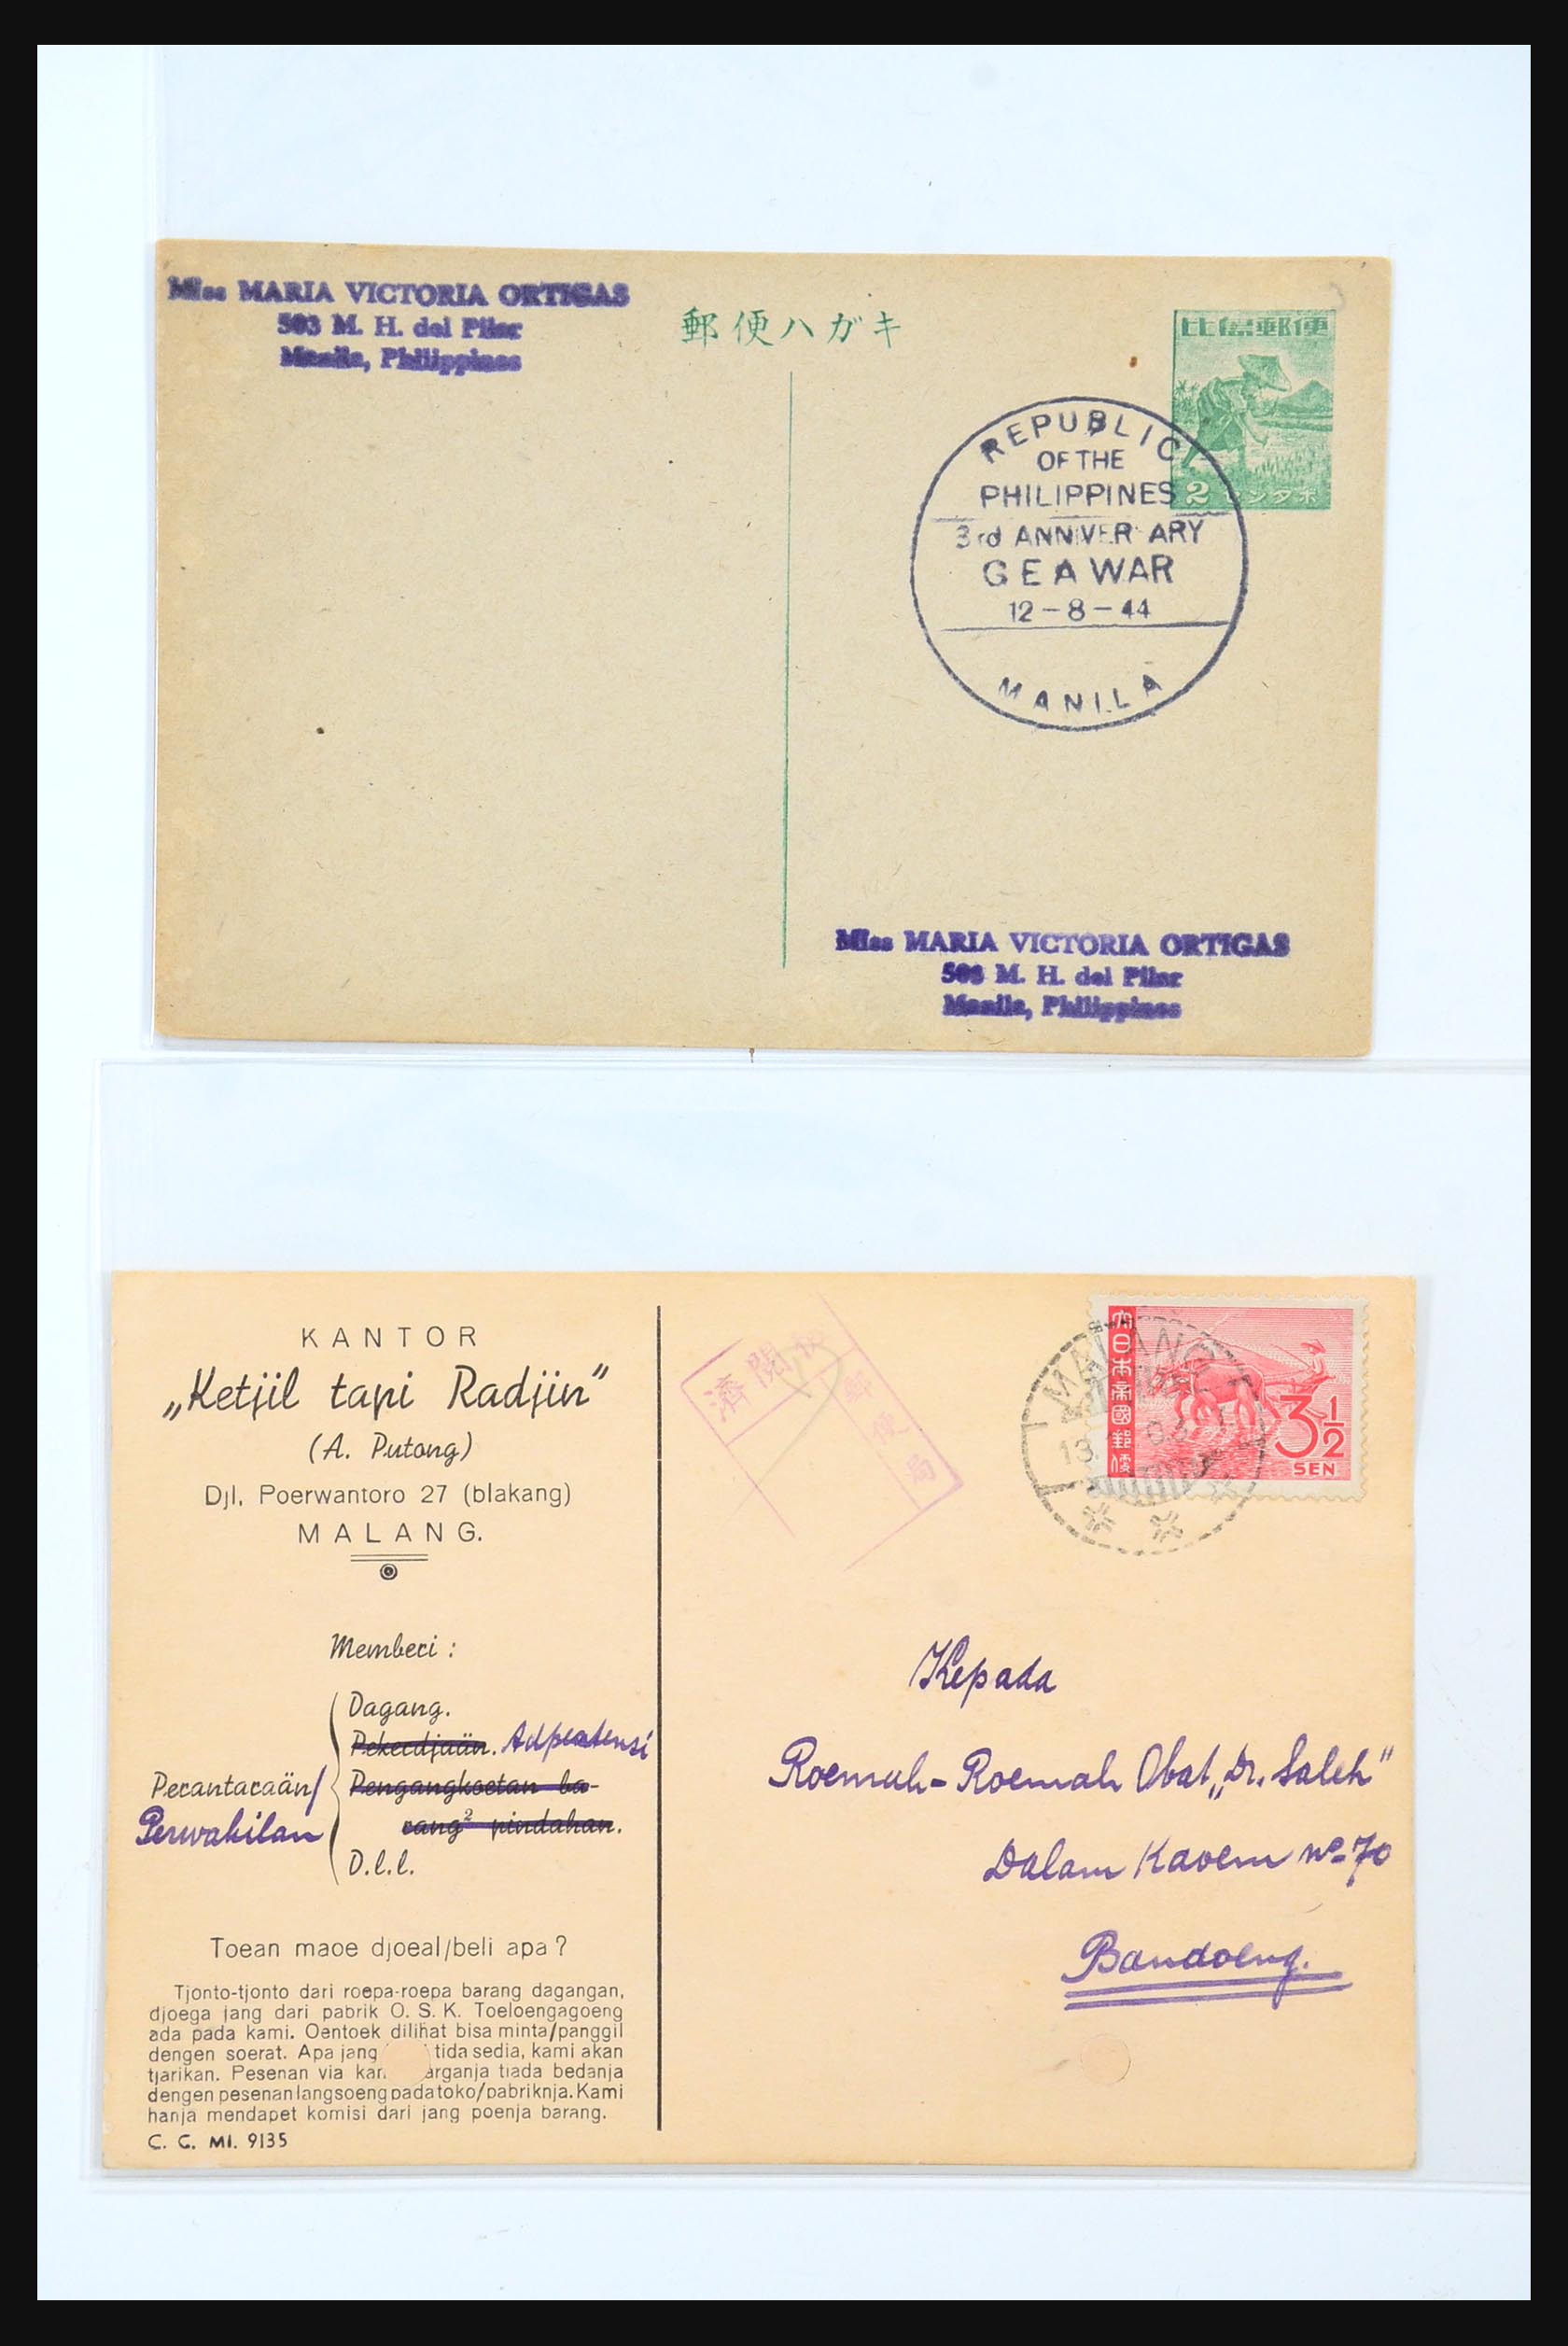 31362 122 - 31362 Netherlands Indies Japanese occupation covers 1942-1945.